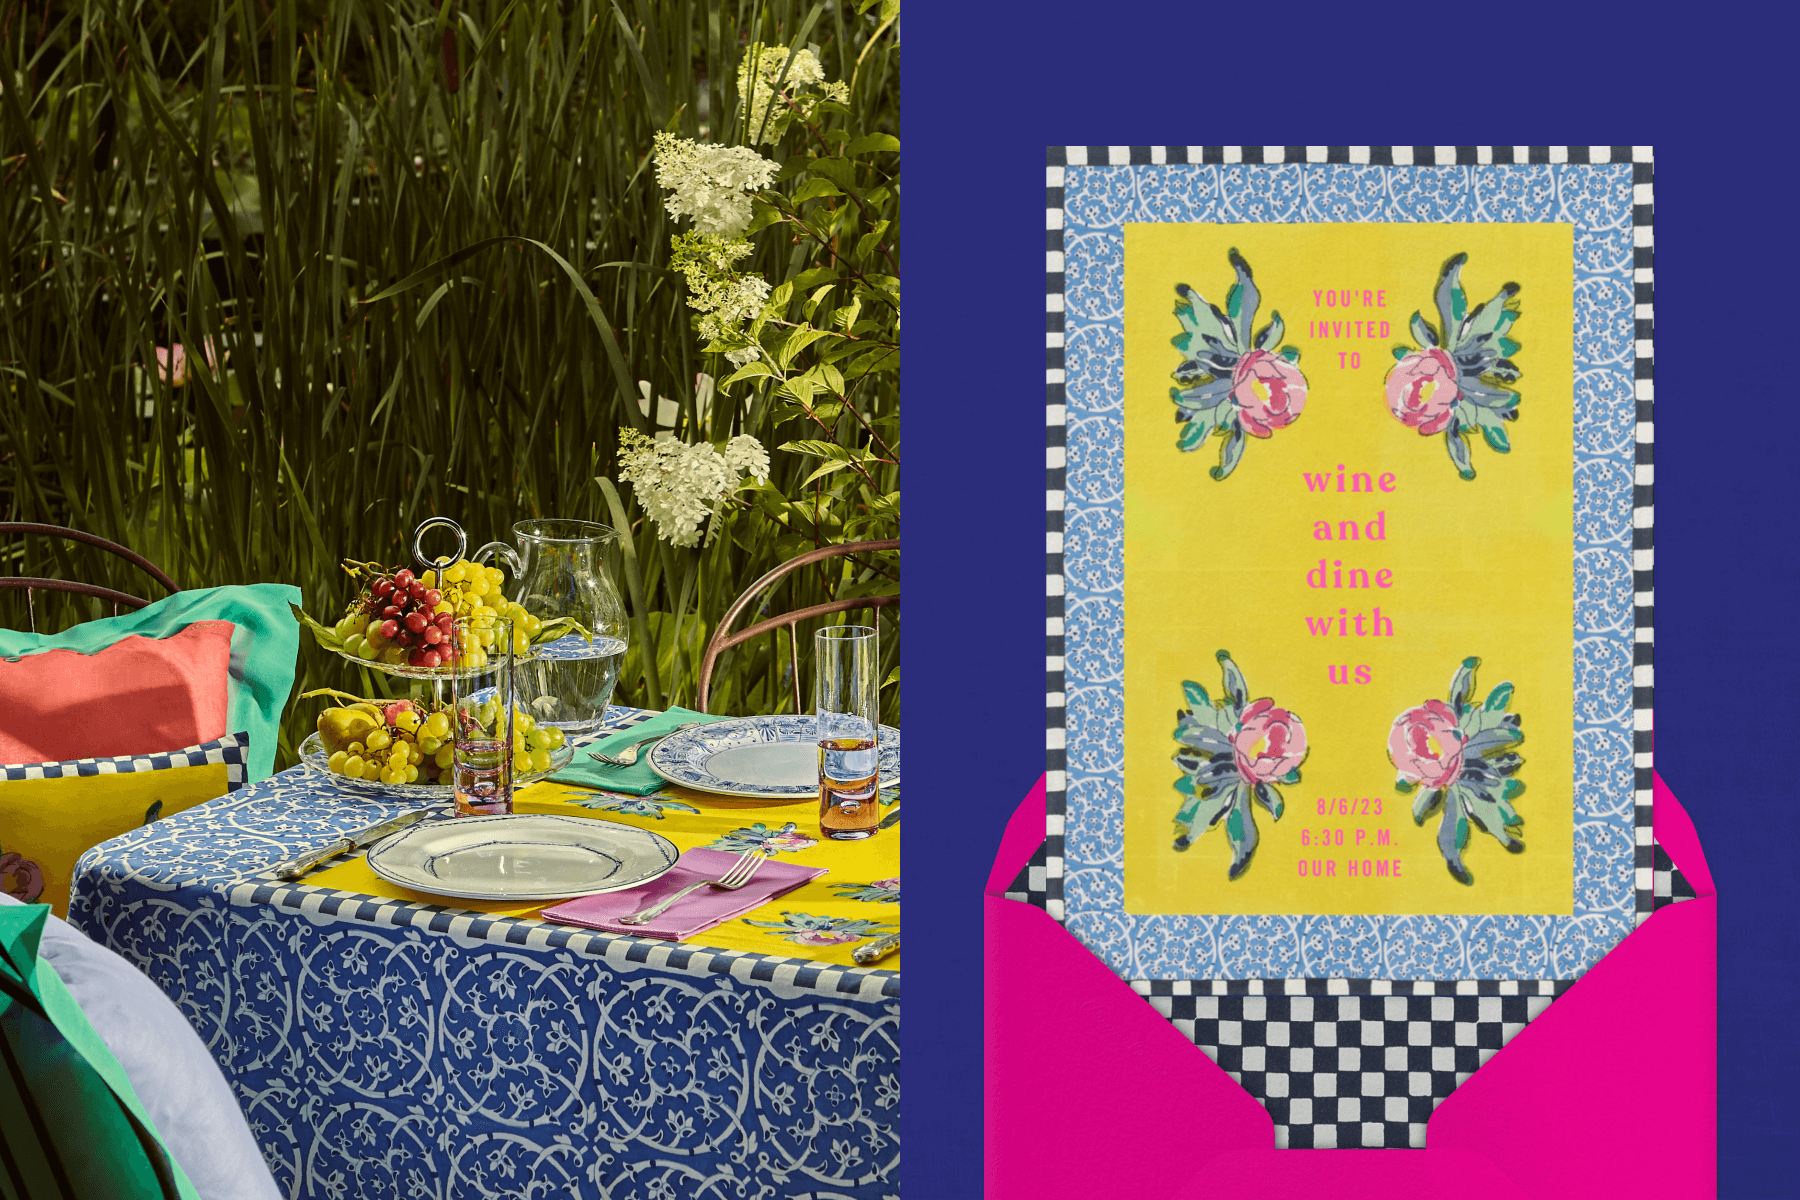 Left: A colorful table with a block-printed tablecloth and grapes on a cupcake stand in front of tall decorative grass. Right: An invitation to “wine and dine with us” has a block-printed style blue border and checkerboard border with a yellow rectangle in the middle and four flowers in the corner, above a pink envelope with checkered liner.